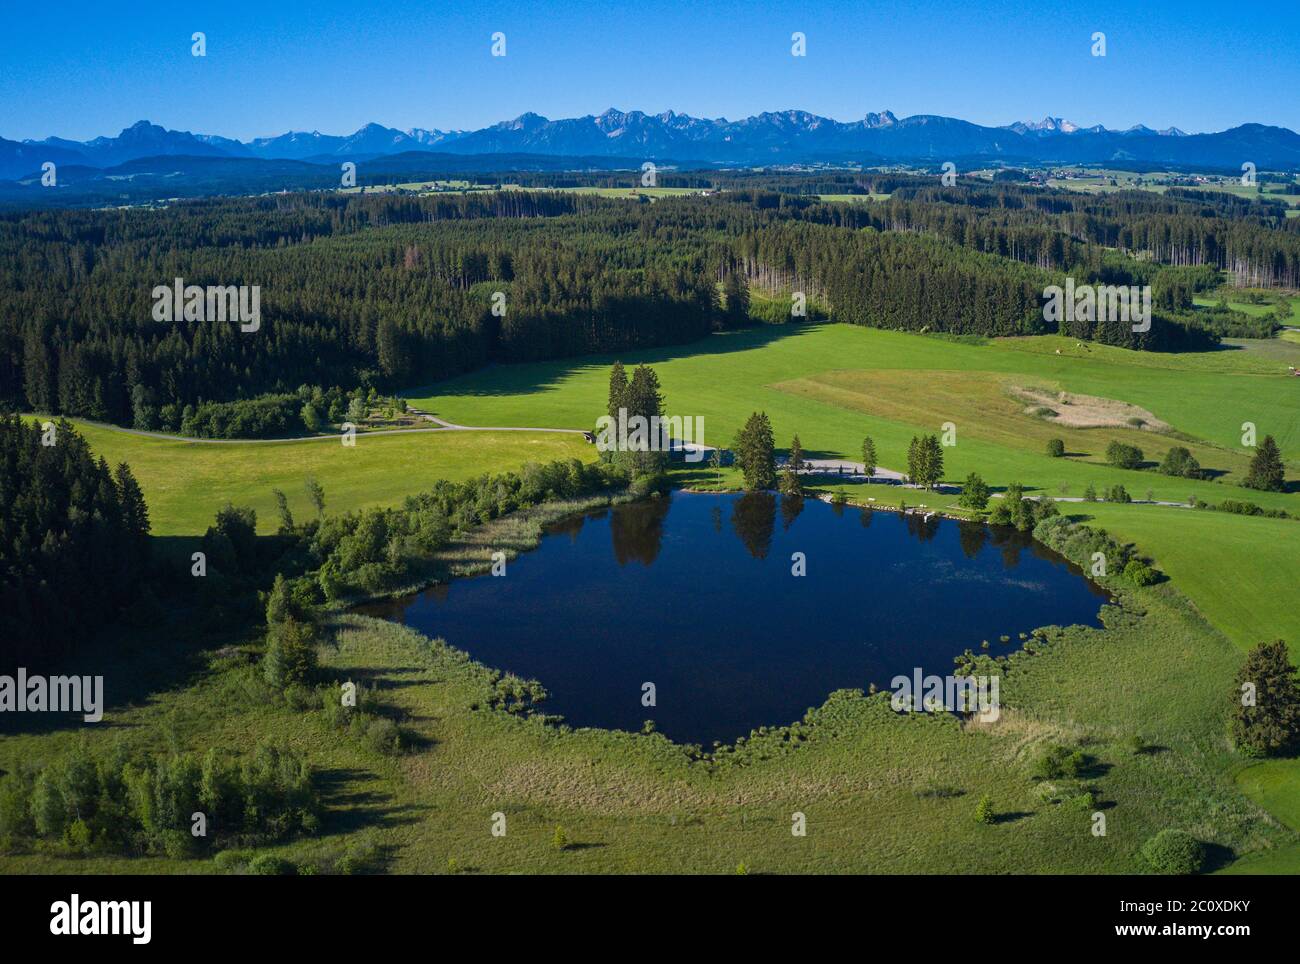 Marktoberdorf, Germany, 12th June 2020  Kuhstallweiher, a small lake for relax and swimming. © Peter Schatz / Alamy Stock Photos Stock Photo